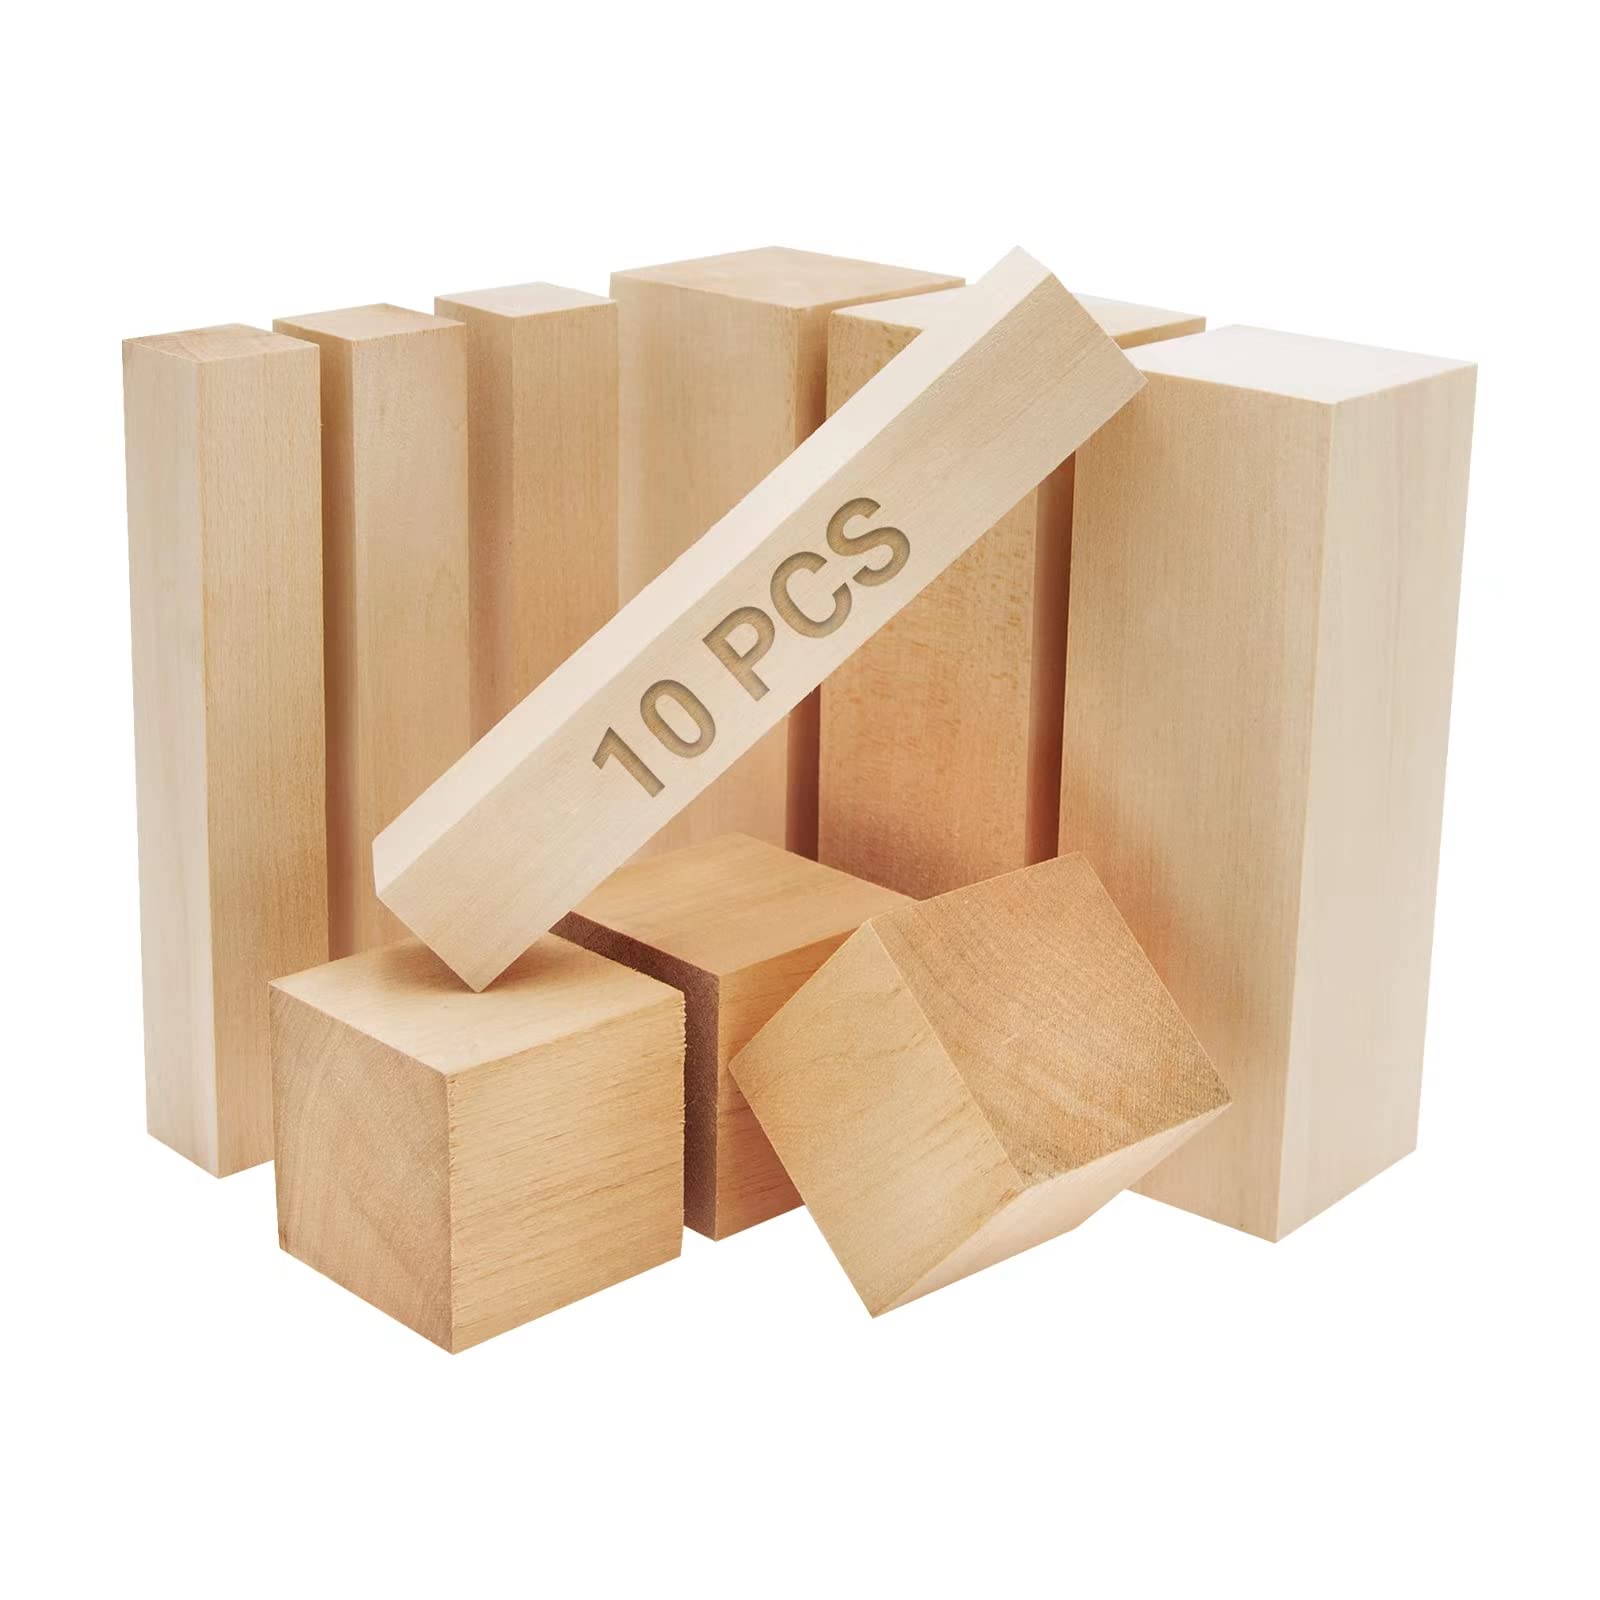 10 Pcs Large Unfinished Basswood Carving Blocks Fits Wood Carving Tools  Whittlng Kit for Wood Carving Beginners and Professionals 10 Pcs Wood Block